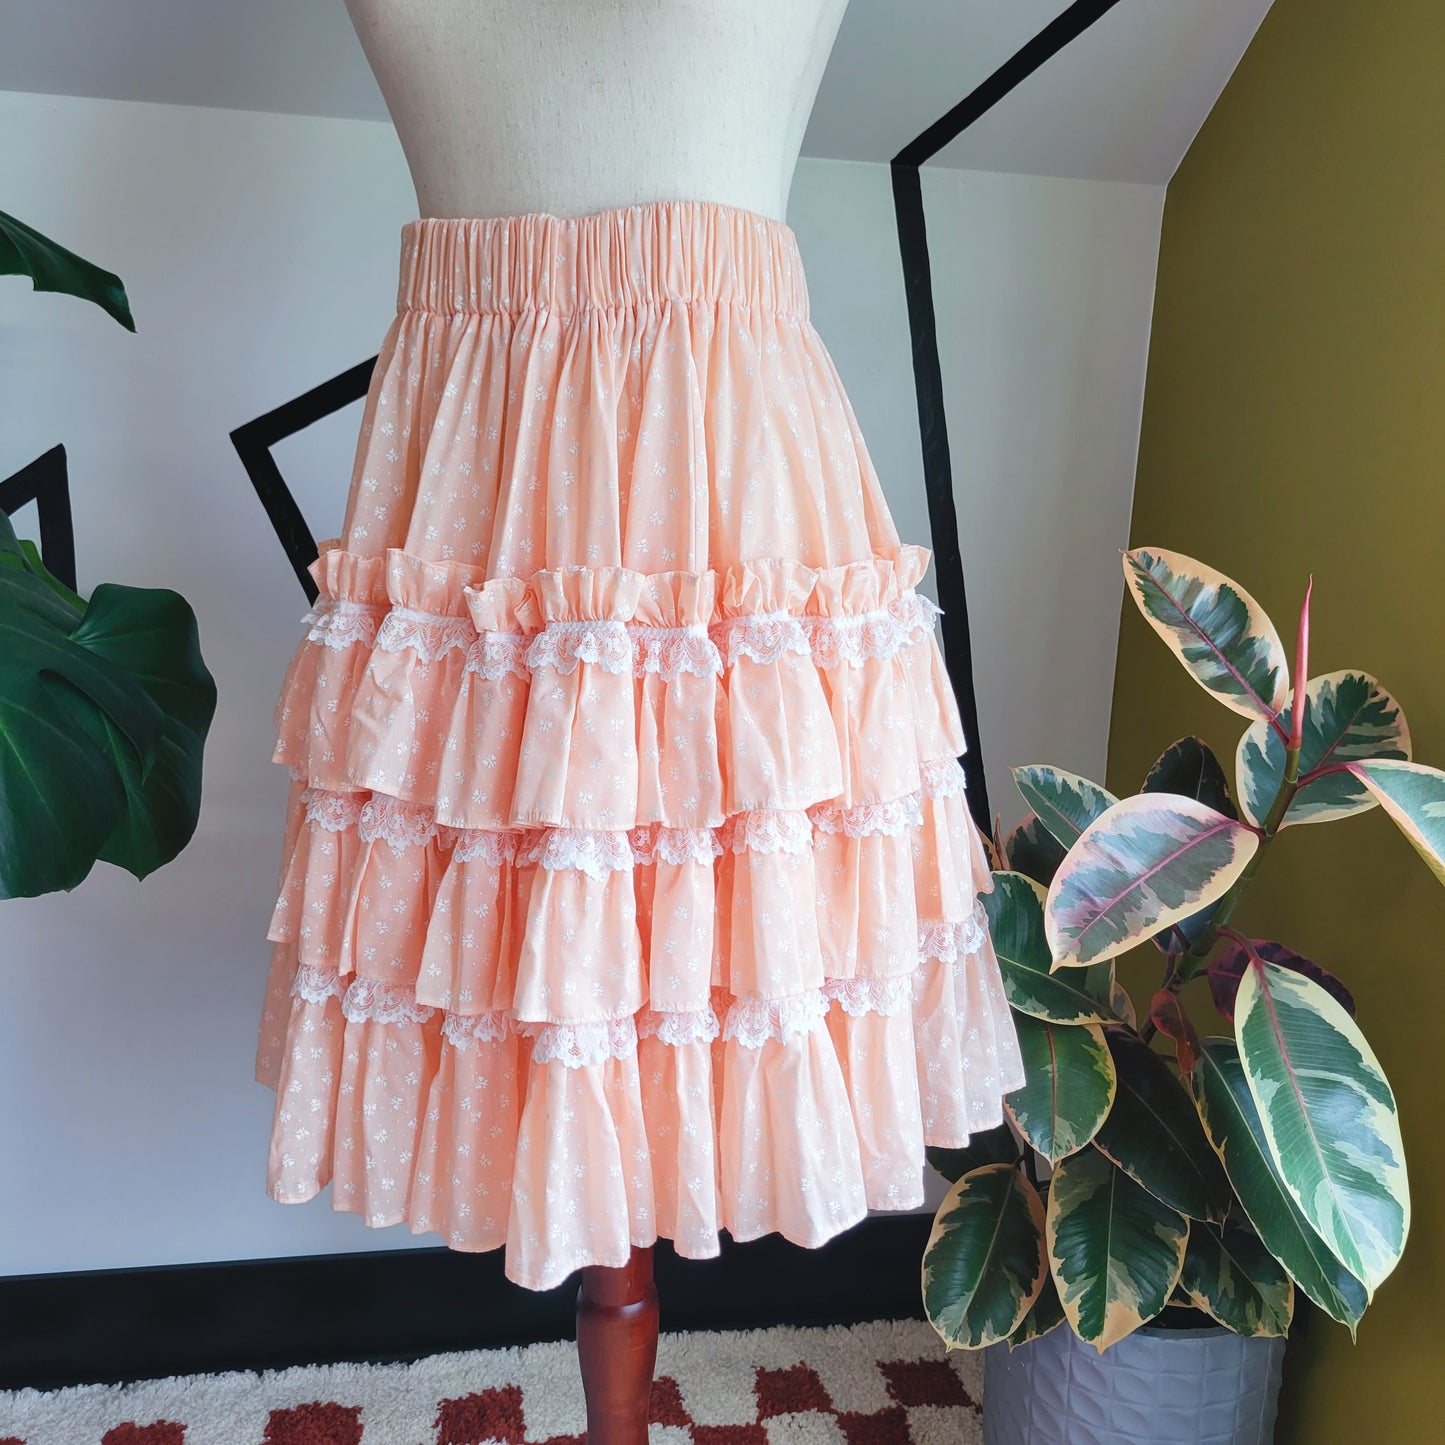 Peach and Lace Vintage Hand Made Tiered Ruffle Skirt - L-2X